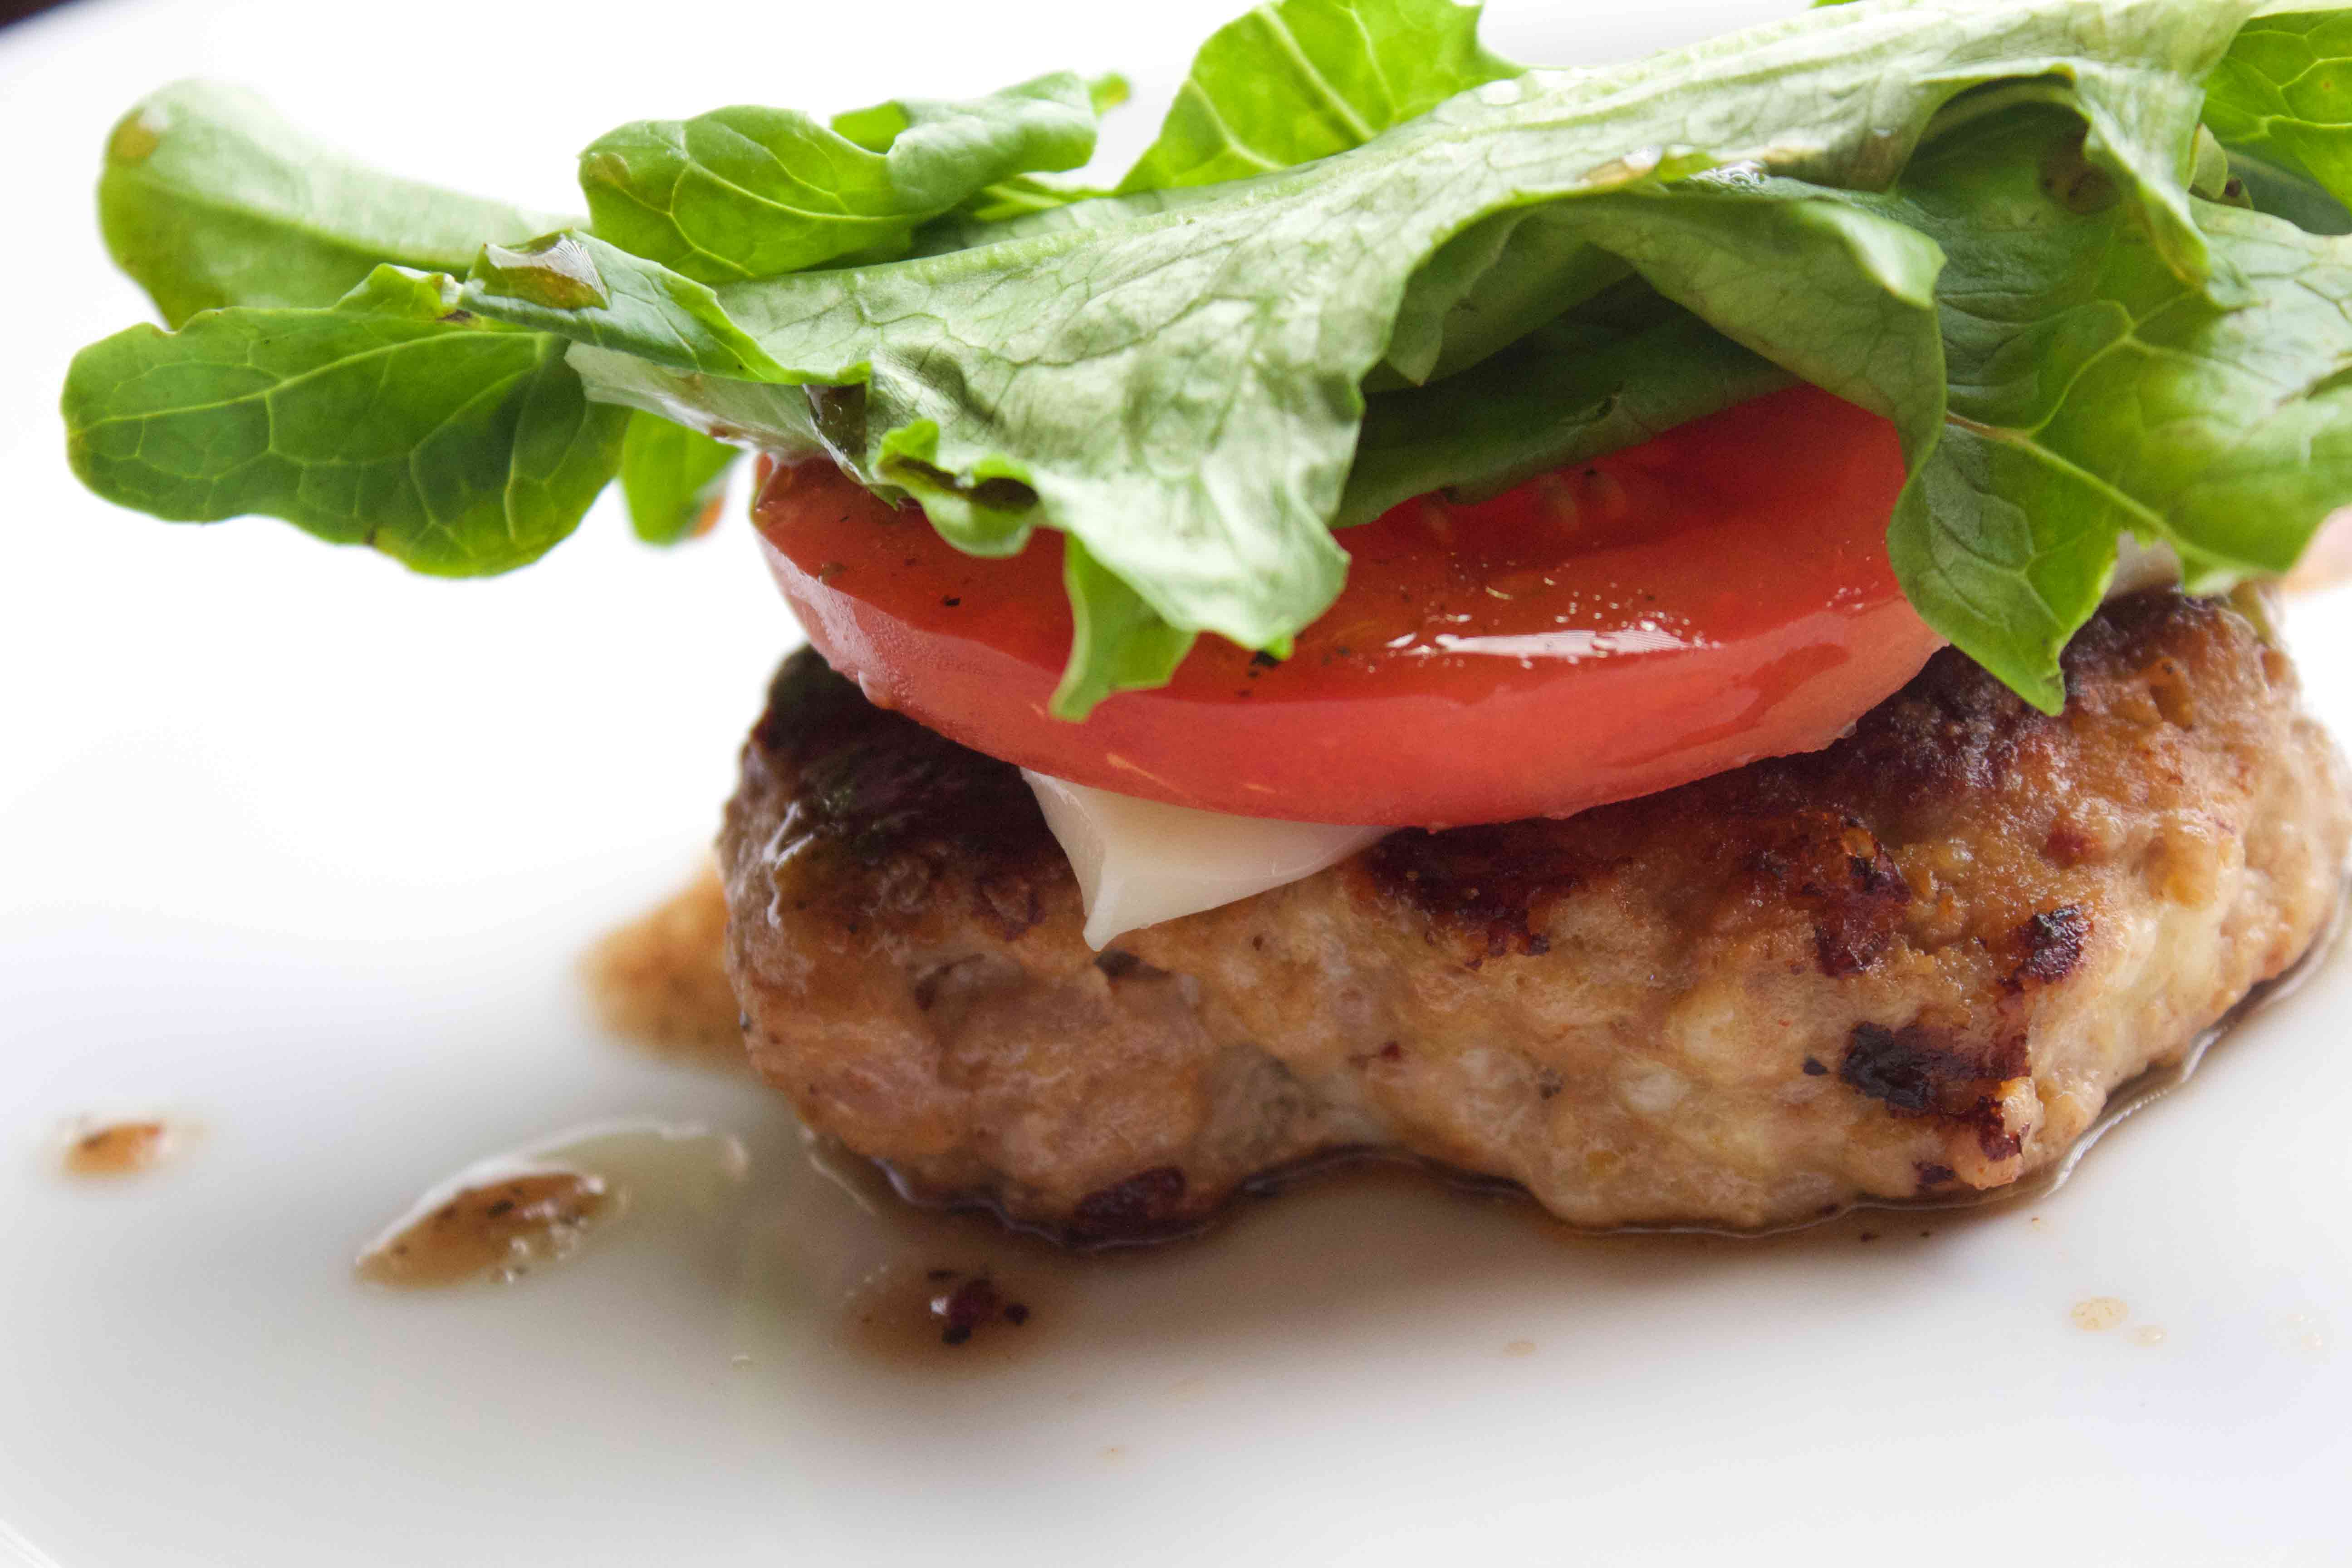 Italian Turkey Sausage Burger. So much flavor without the carbs and fat! Bariatric approved recipes at www.foodcoach.me